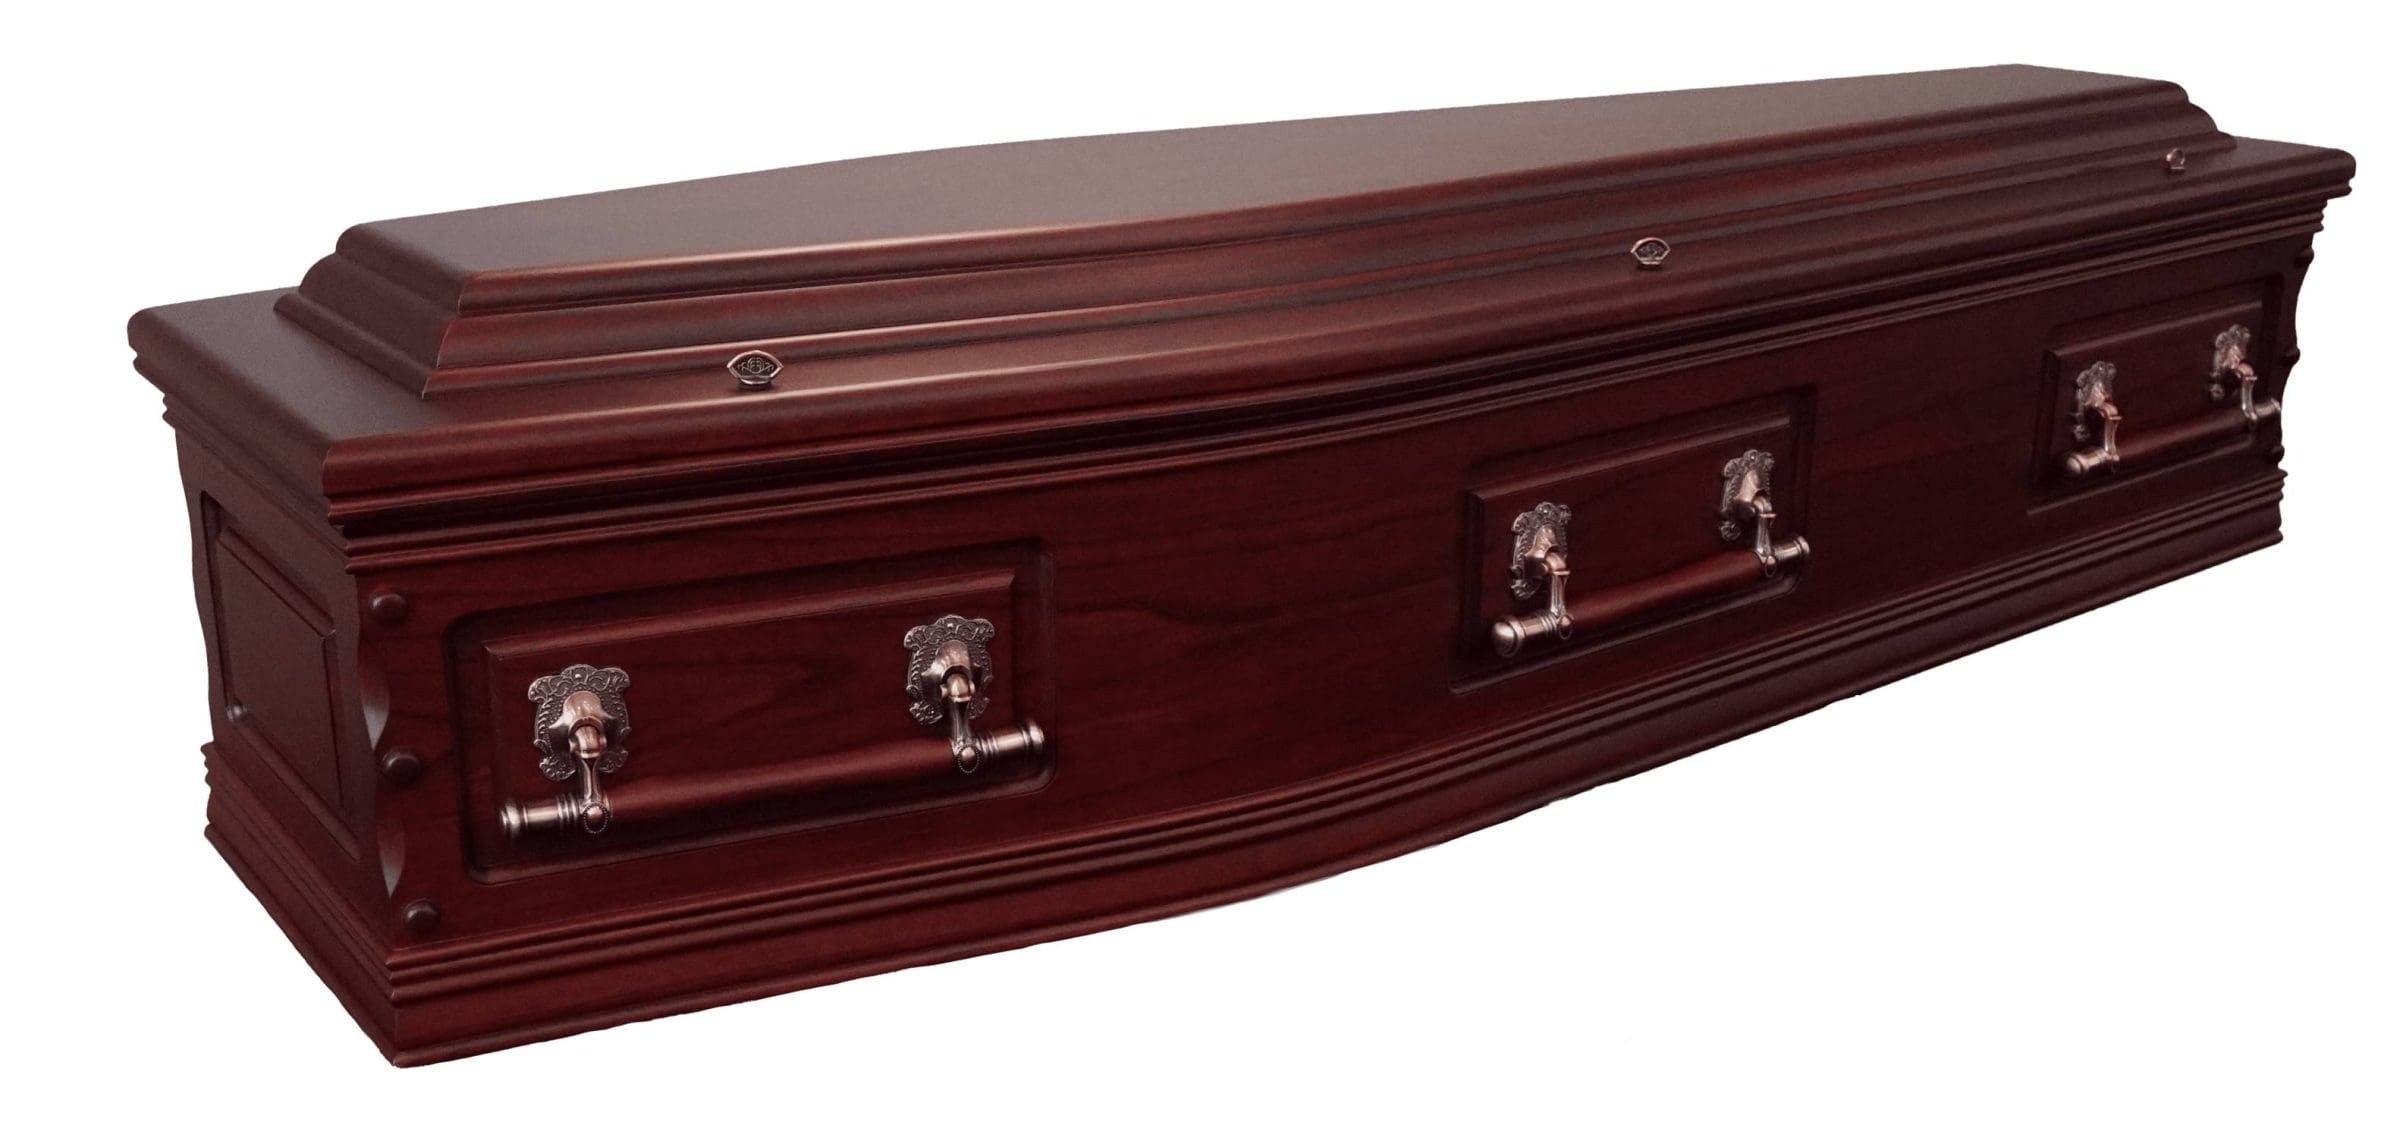 Hunter Satin Finish Coffin by Fry Bros Funerals in Maitland